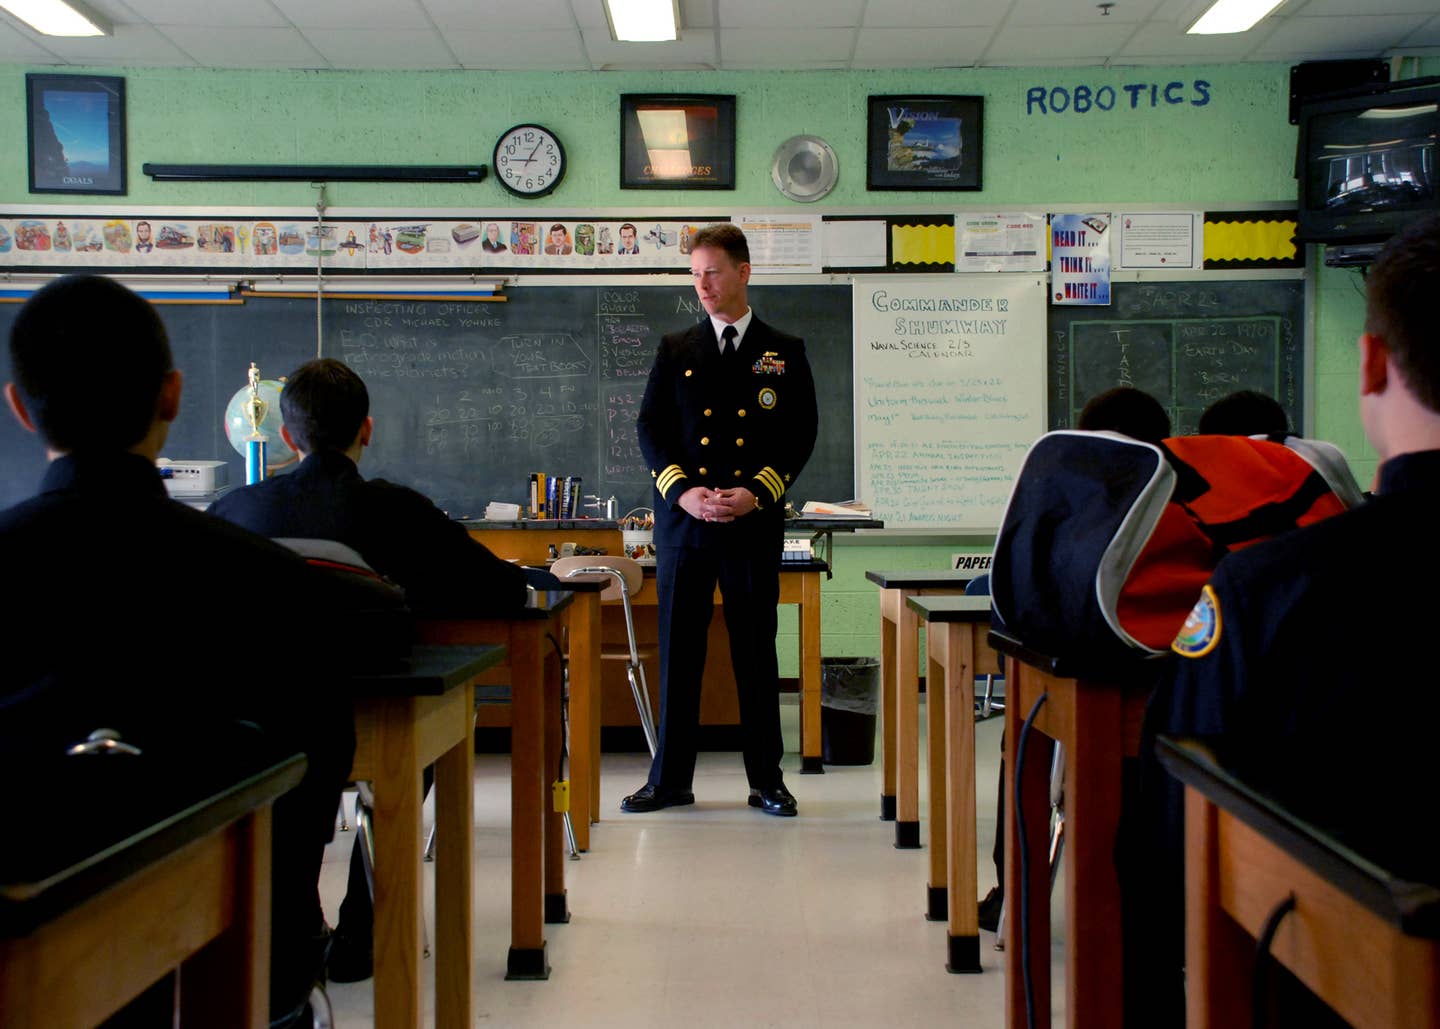 military recuiter at a school classroom during military recruiting crisis period.